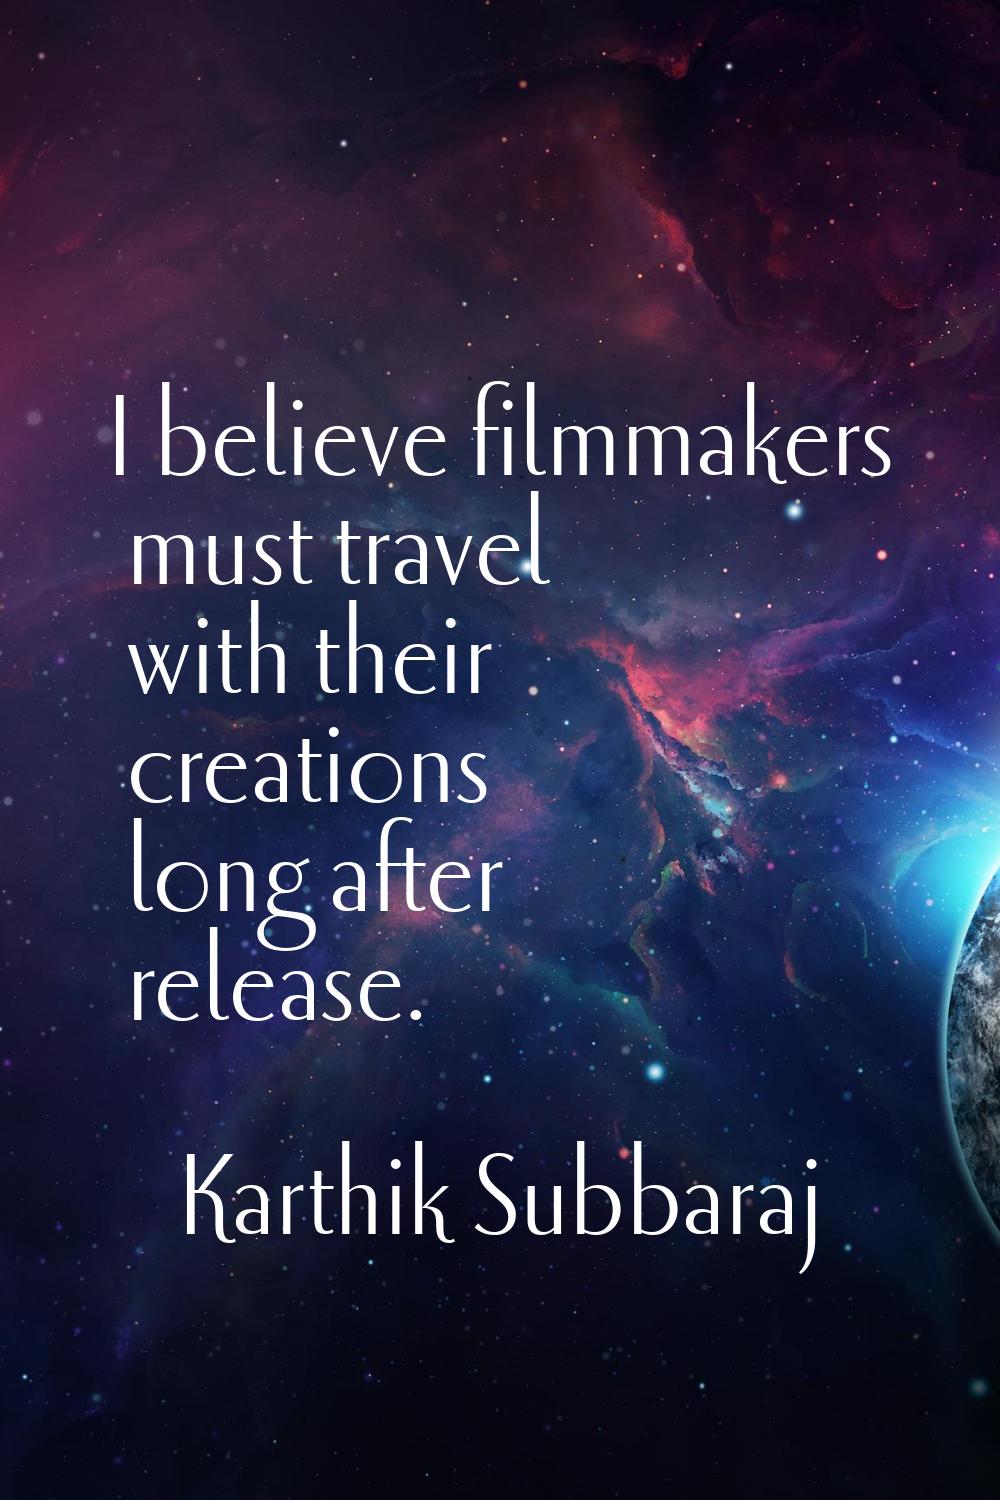 I believe filmmakers must travel with their creations long after release.